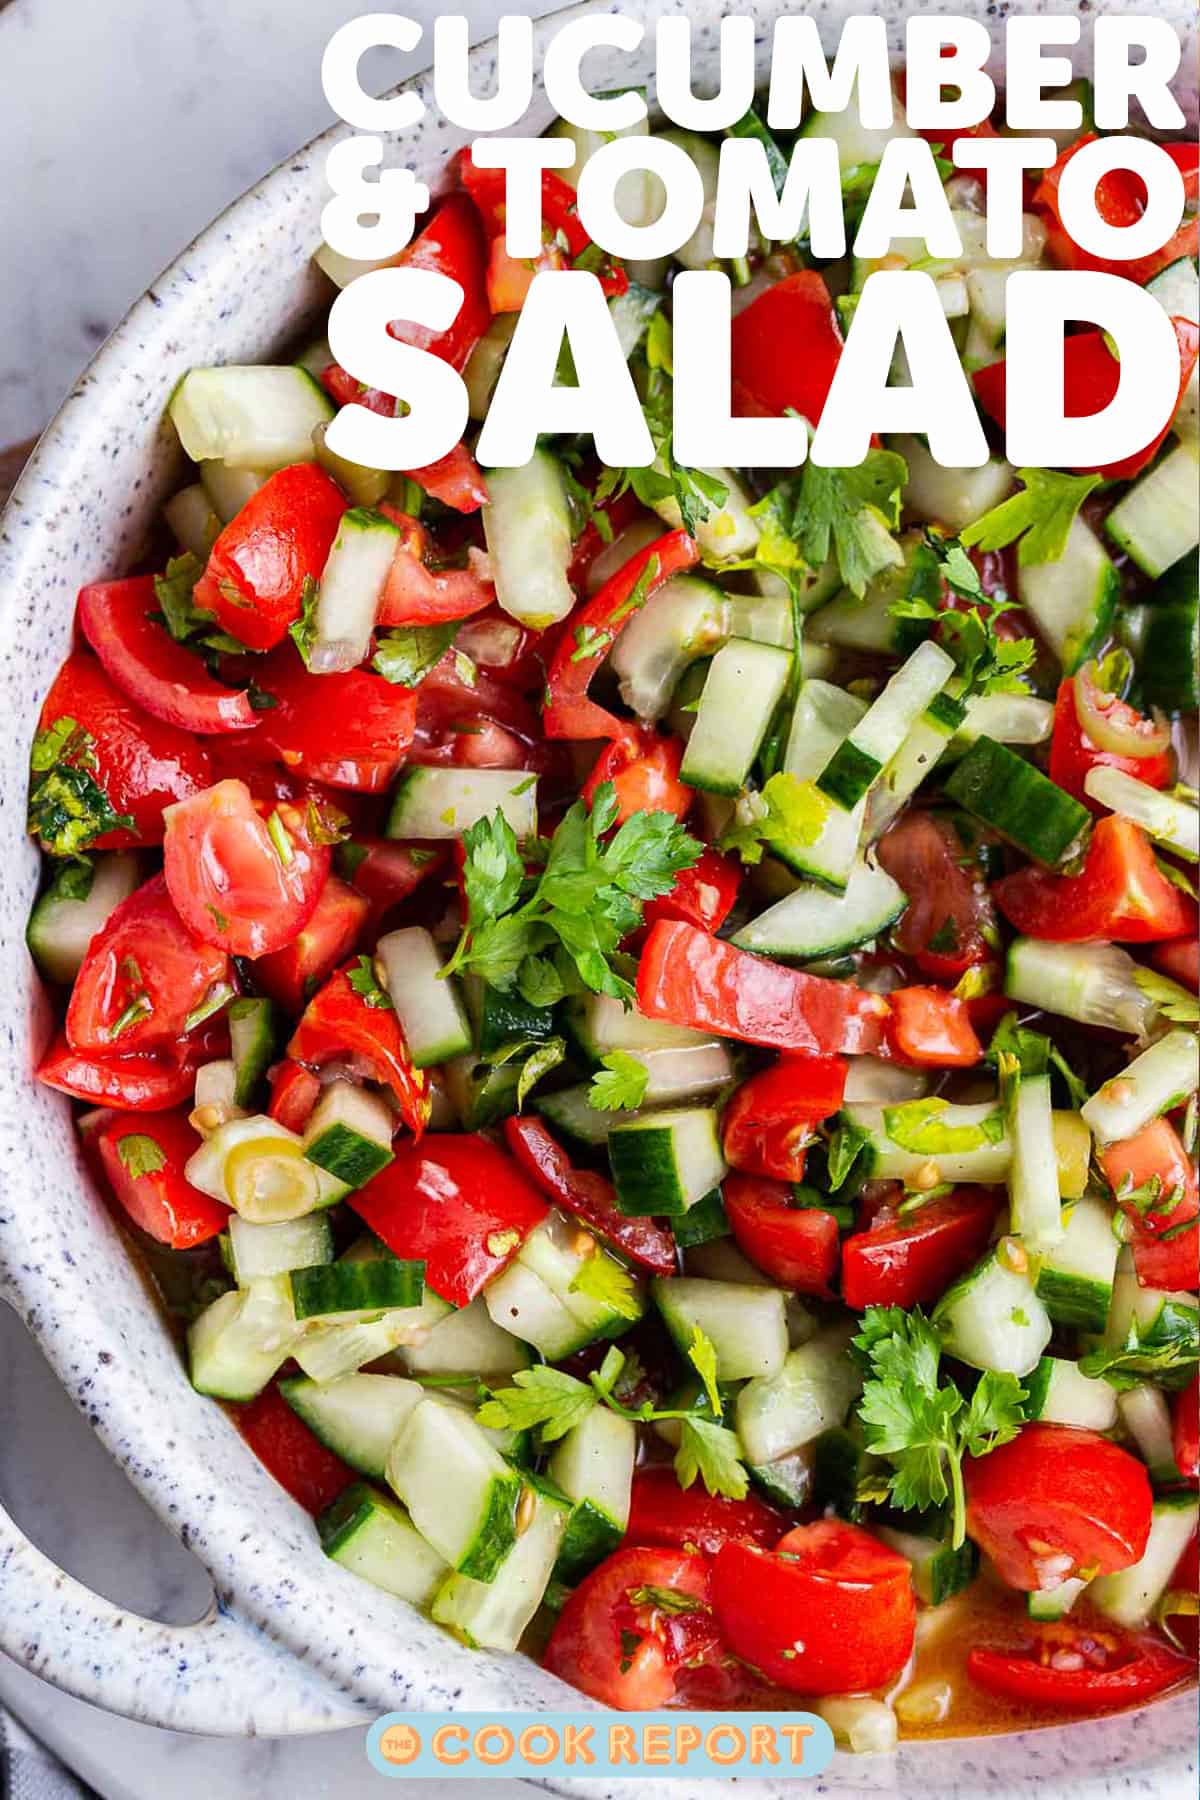 Pinterest image of cucumber and tomato salad with text overlay